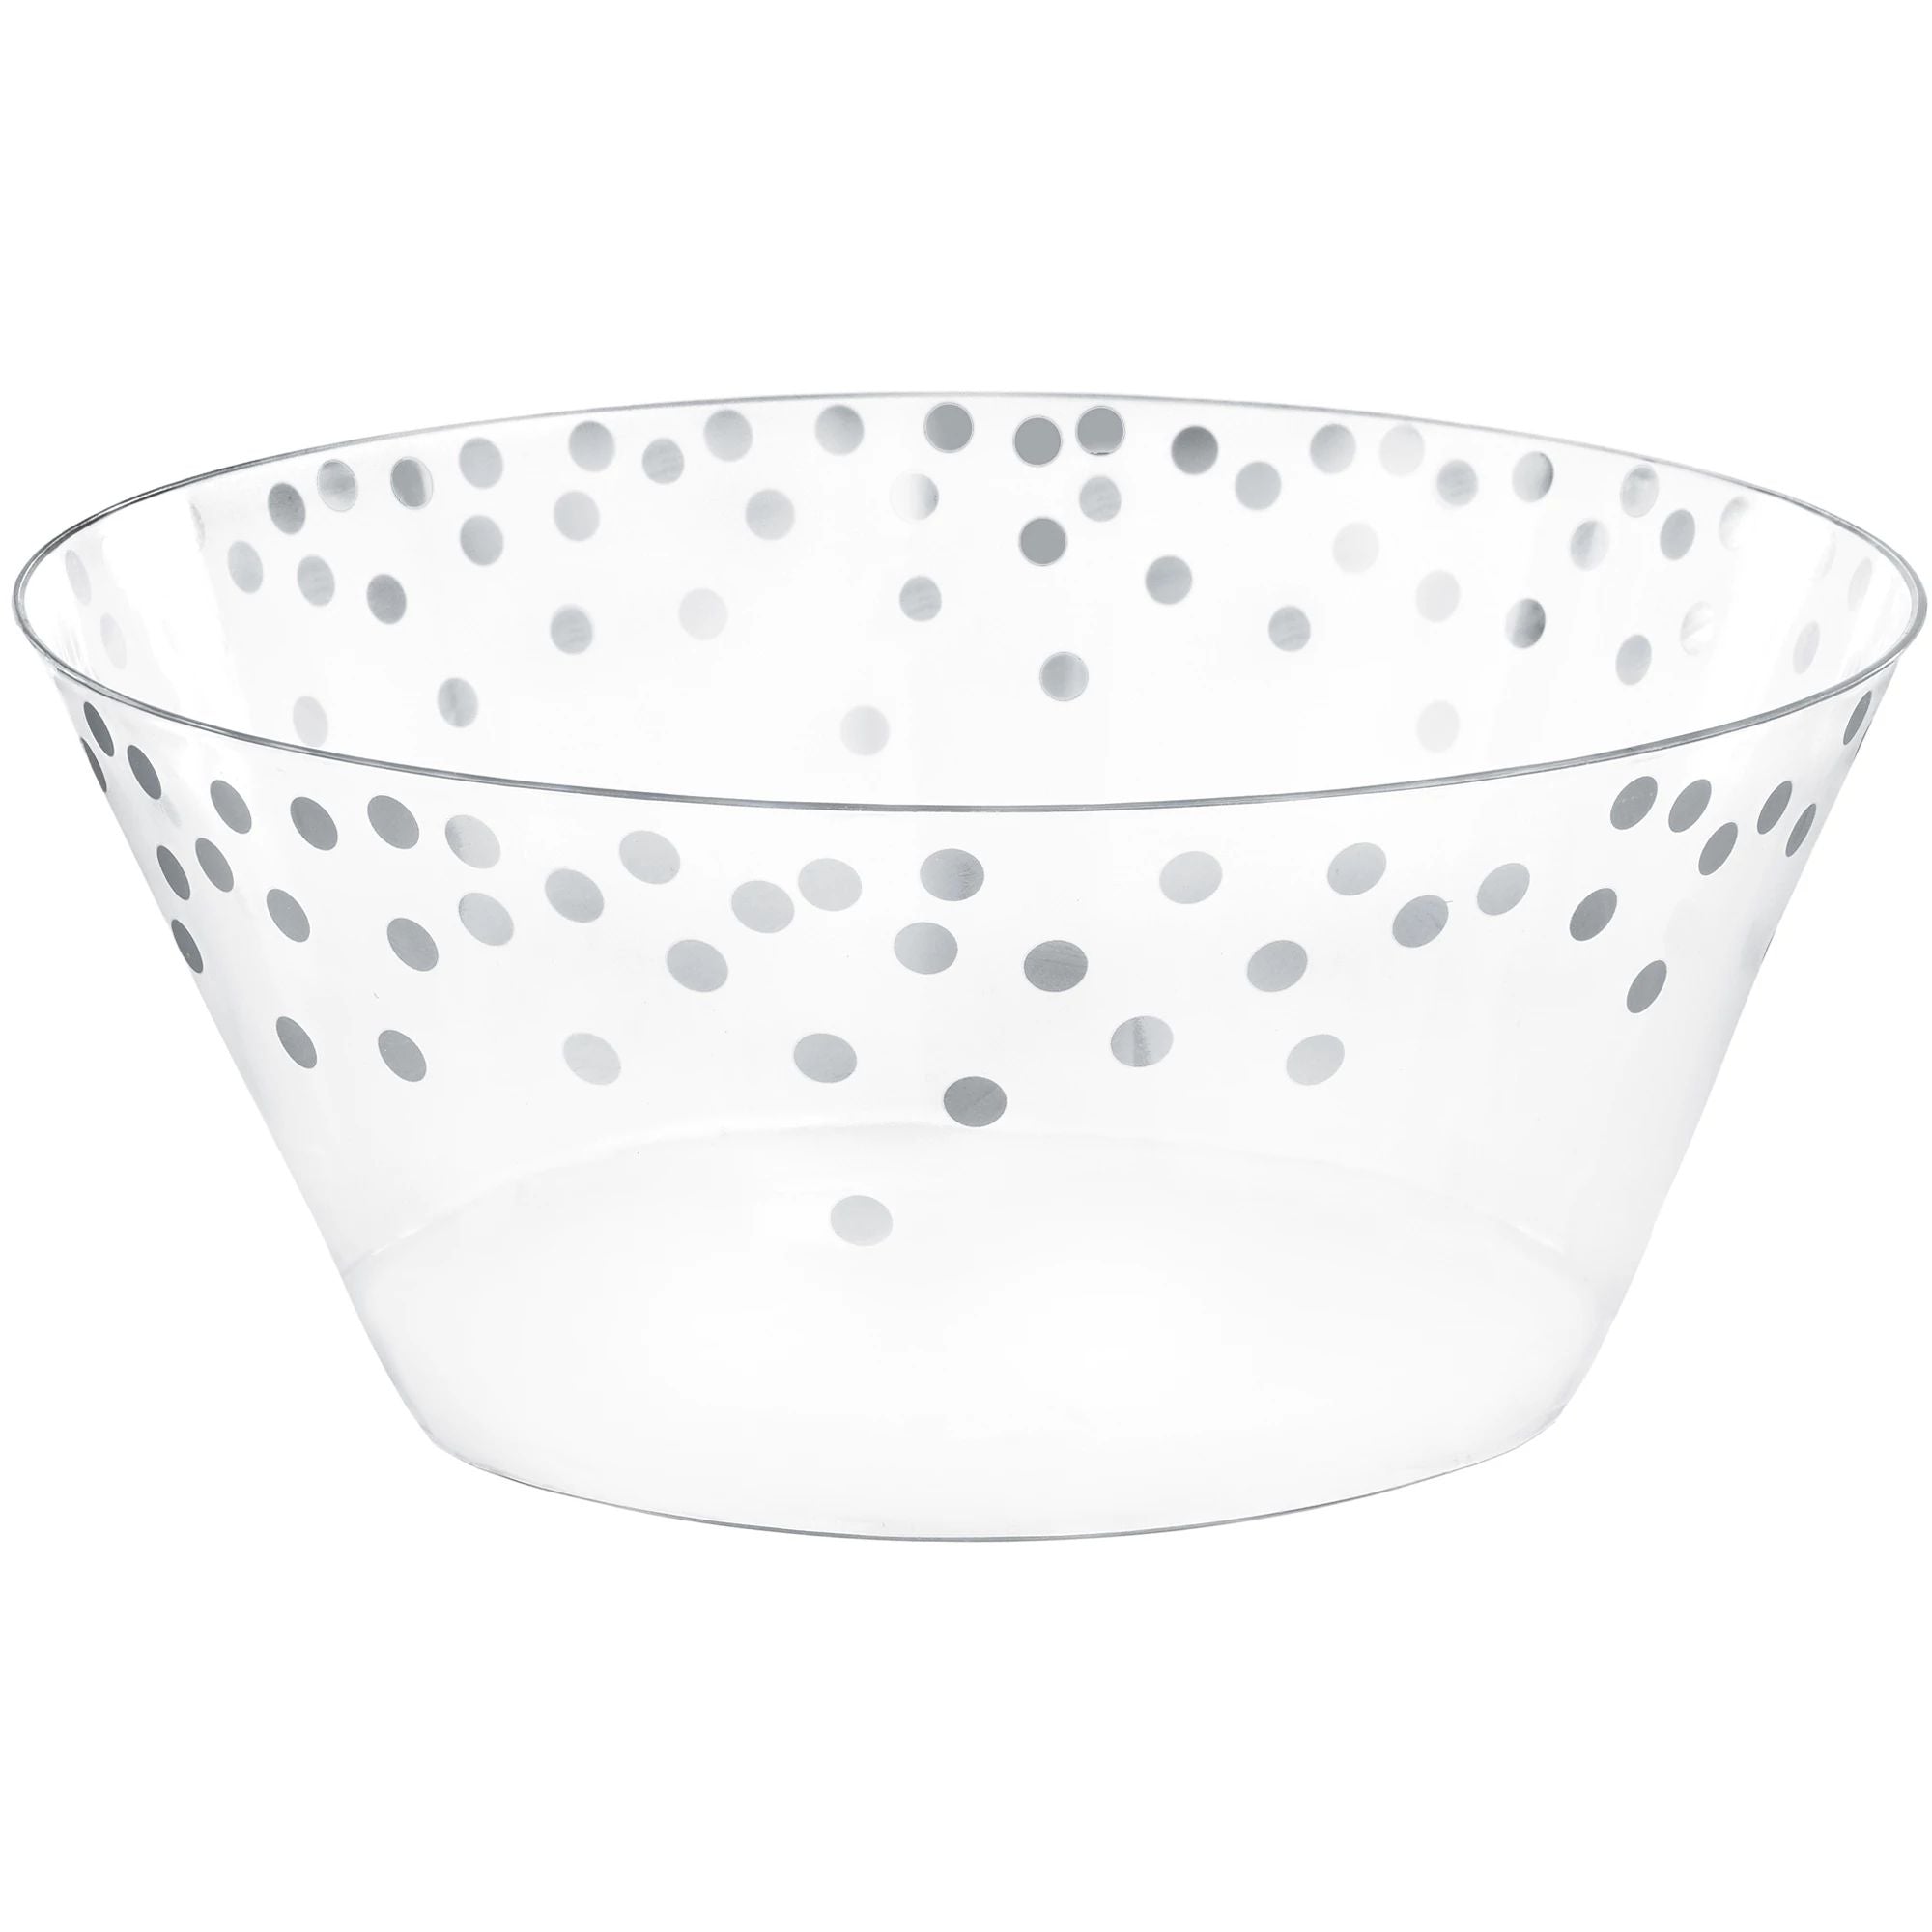 Large Serving Bowl, Recyclable - Silver Dots